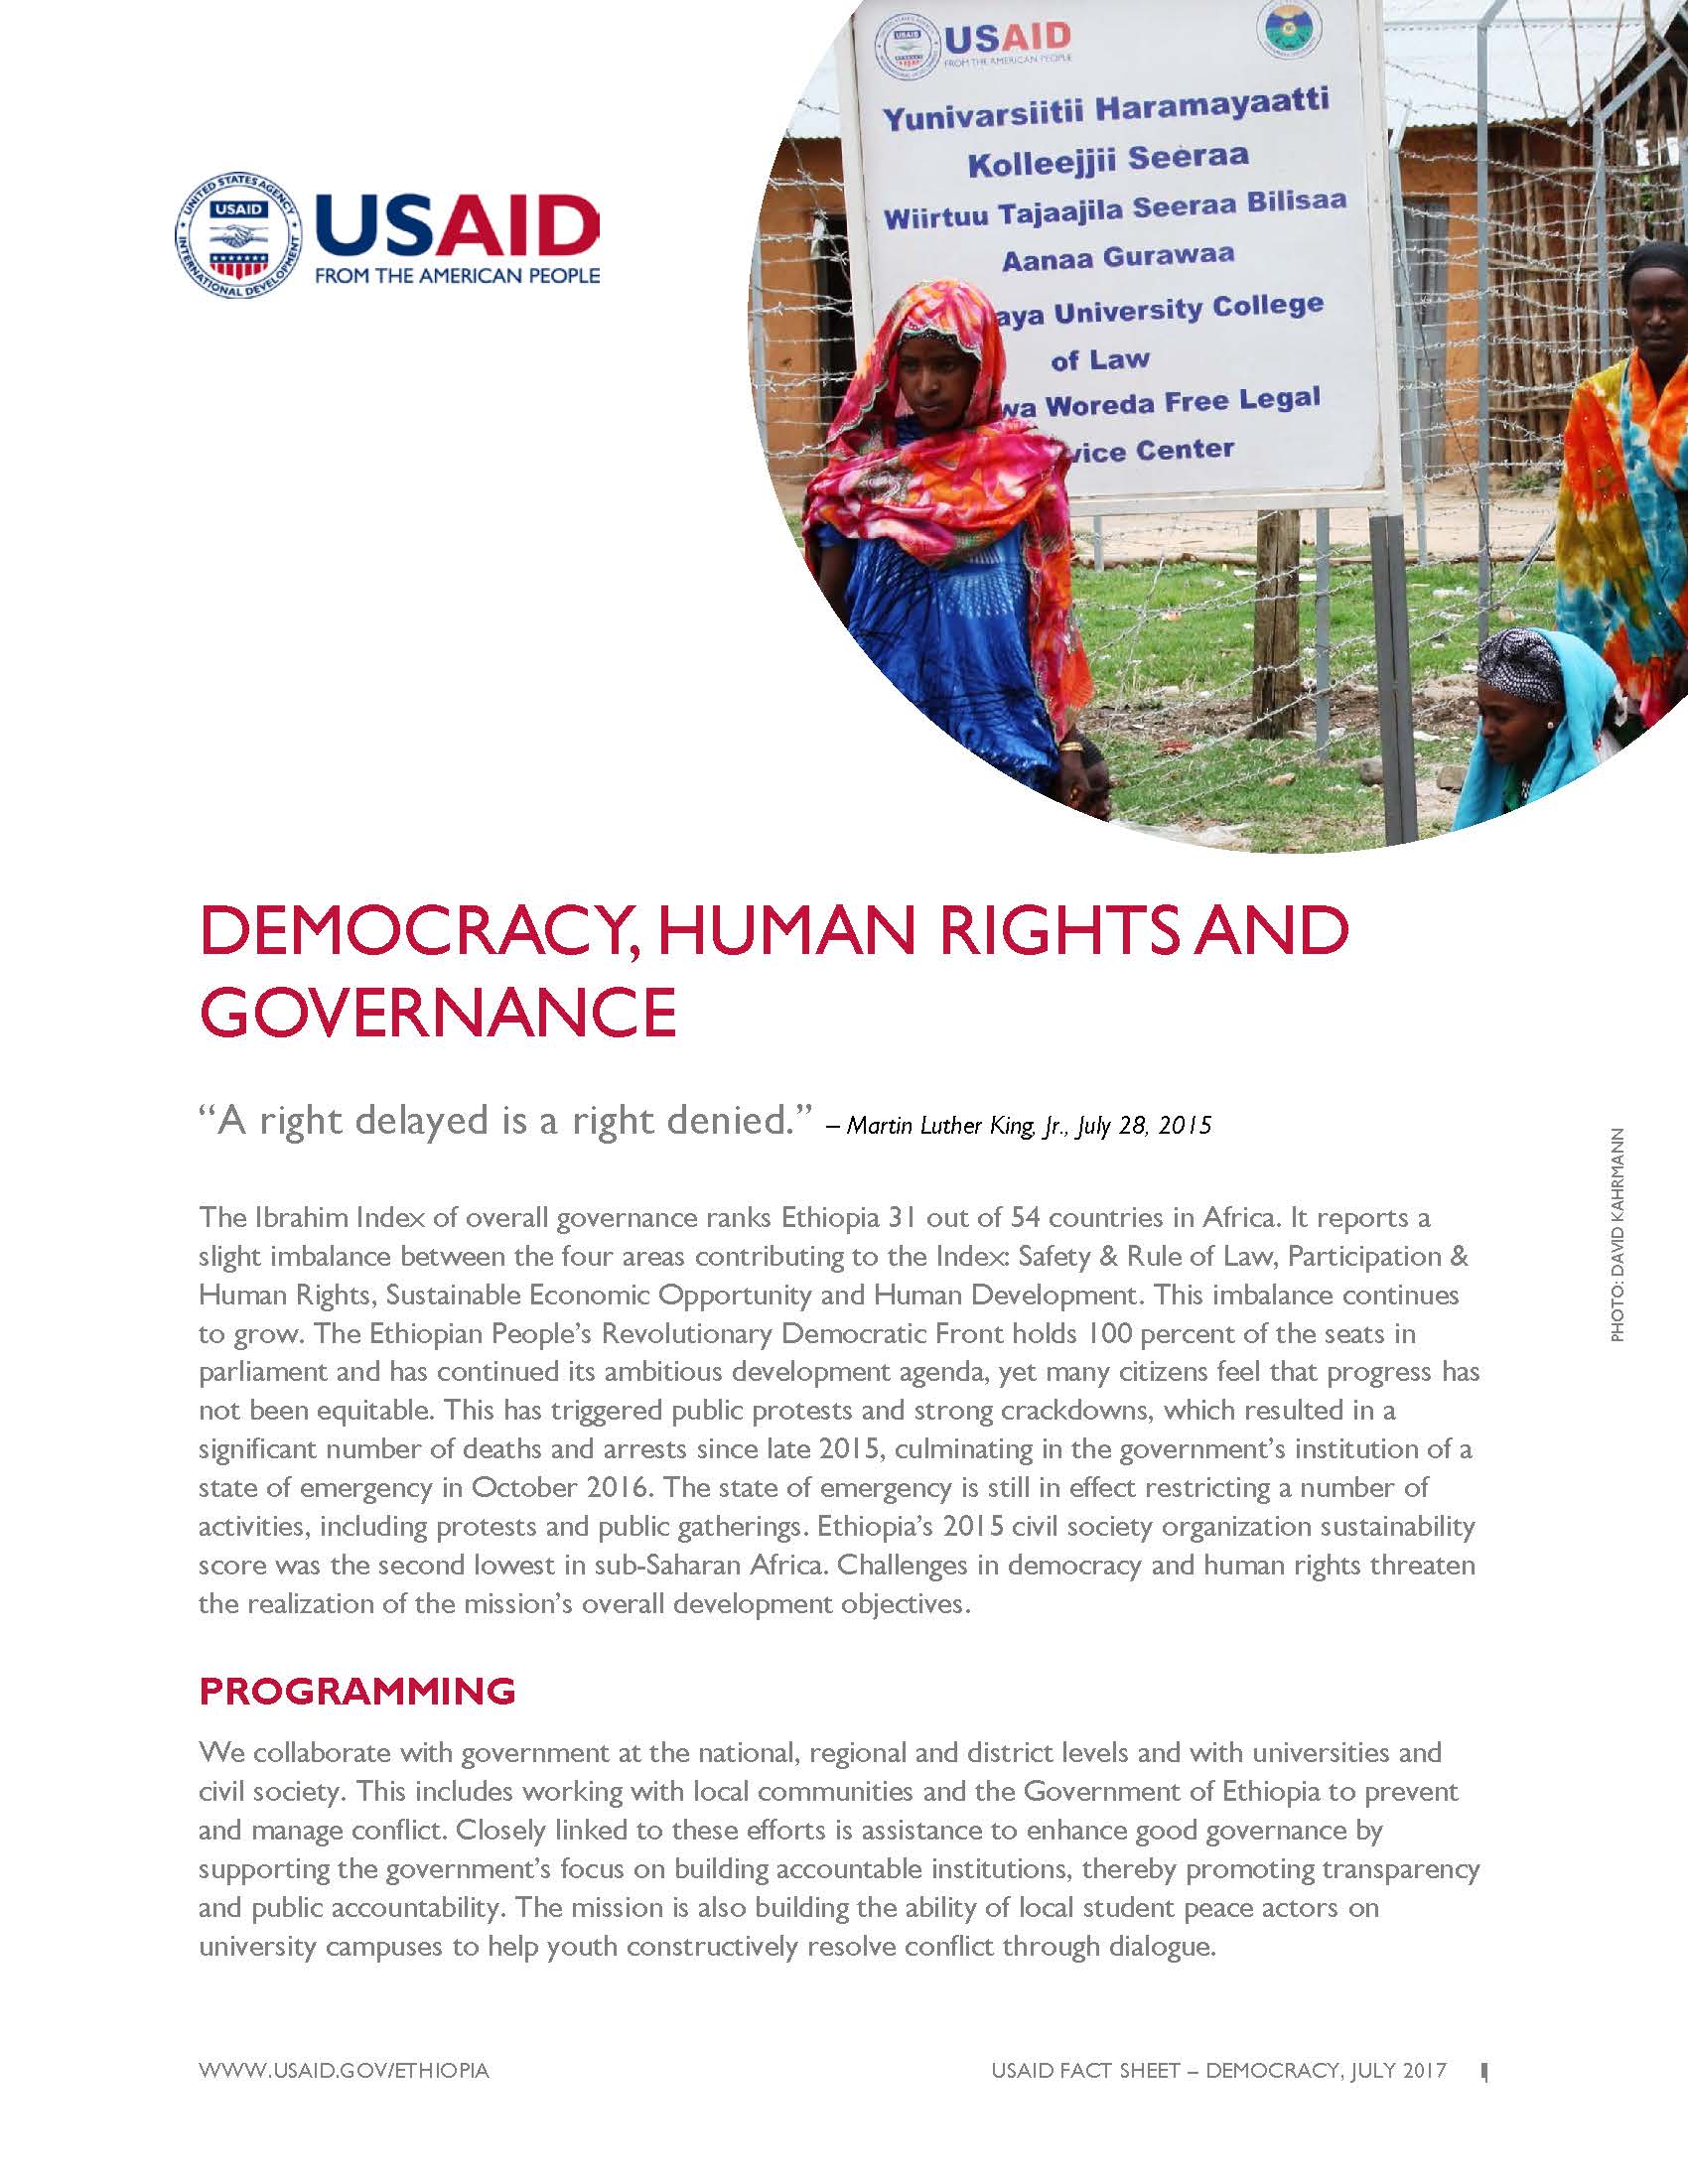 Ethiopia Fact Sheet Democracy, Human Rights and Governance Jul 2017